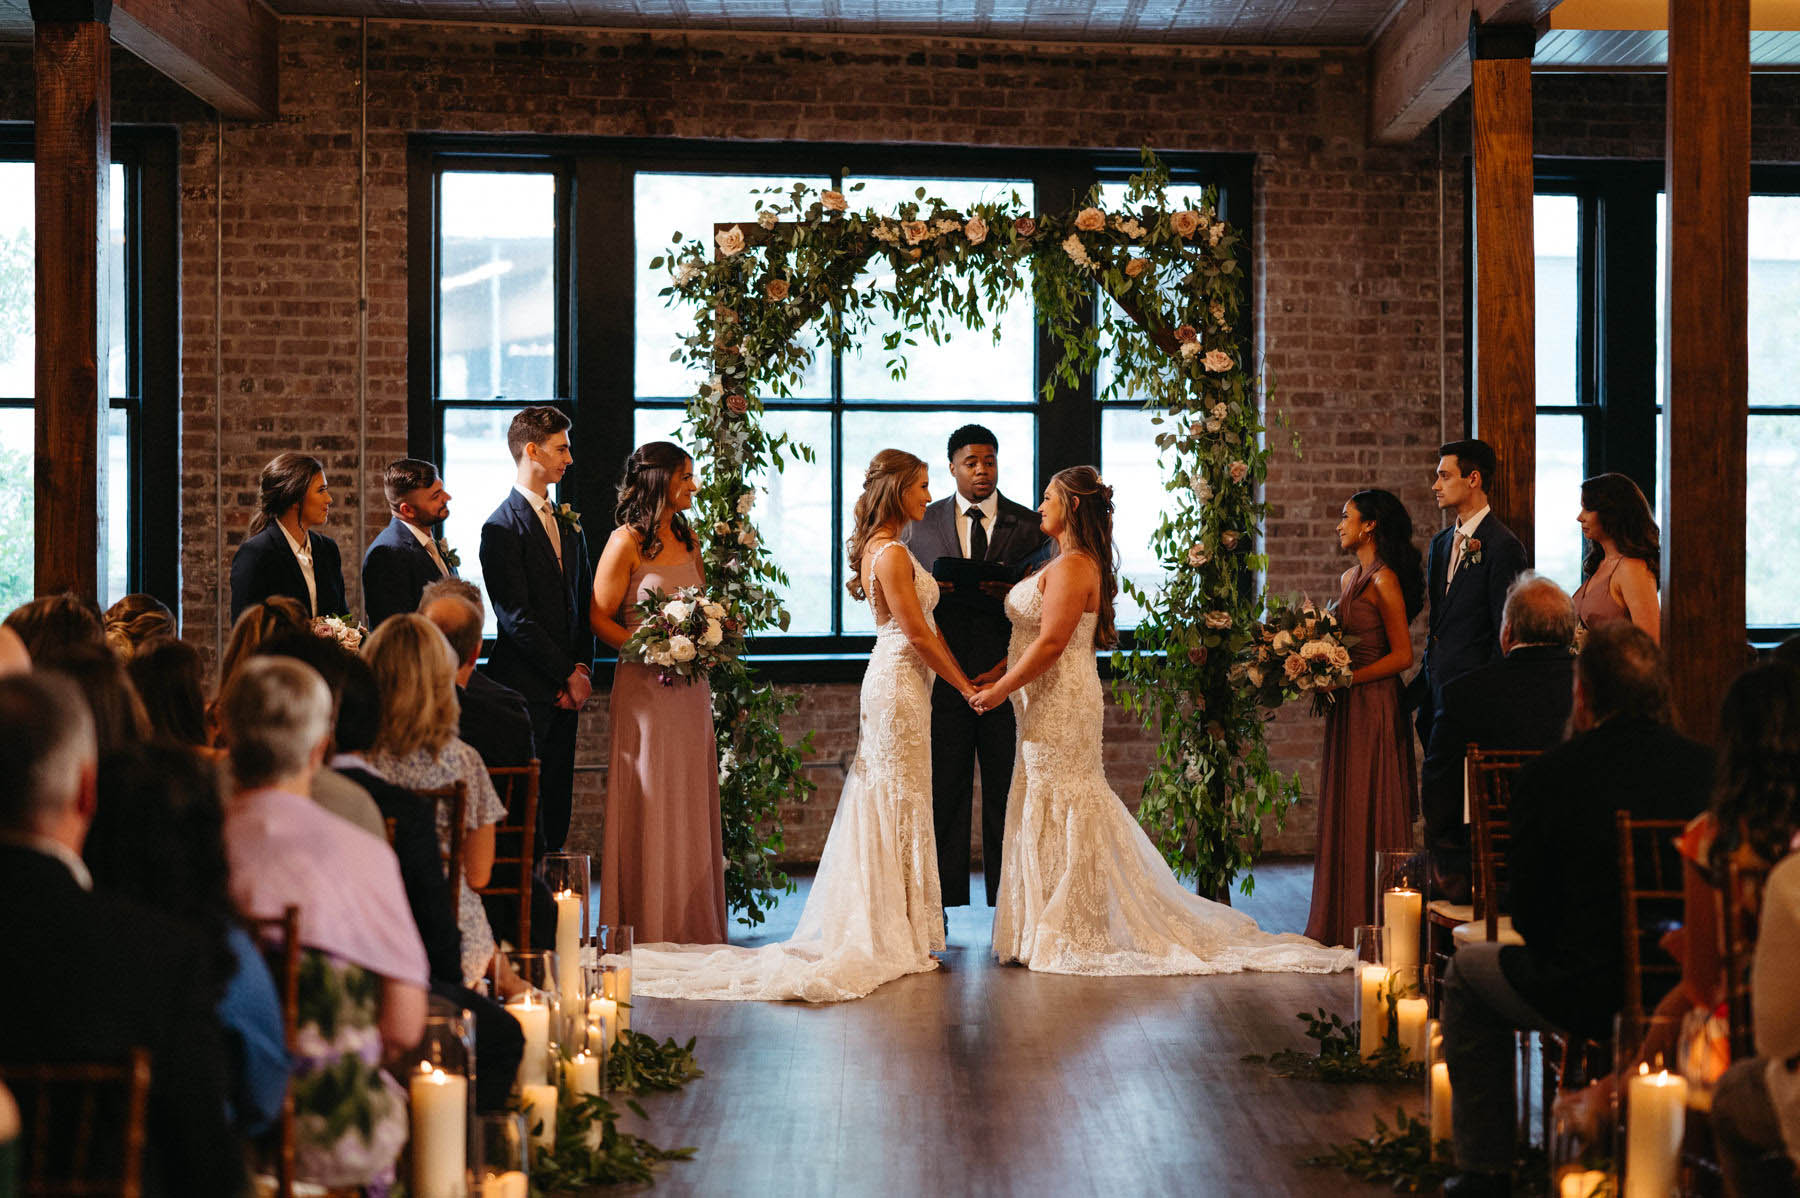 The brides stand under an arbor of greenery and hold hands as they exchange vows.